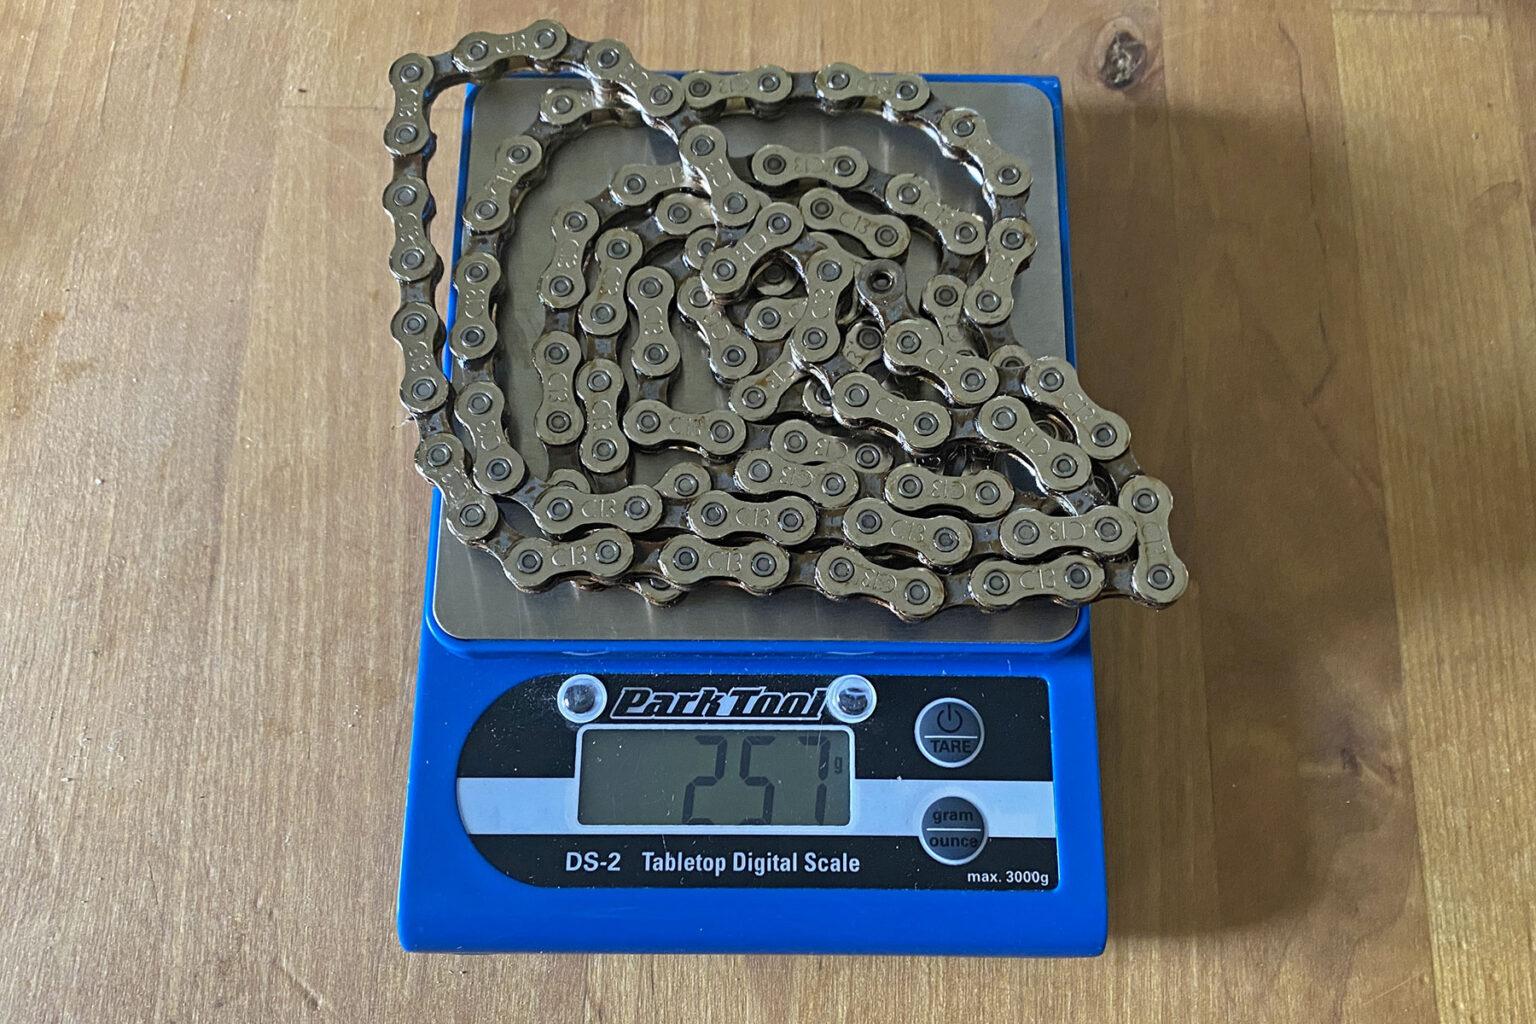 Campagnolo Ekar GT actual weights, affordable Campy gravel group, C13 chain uncut